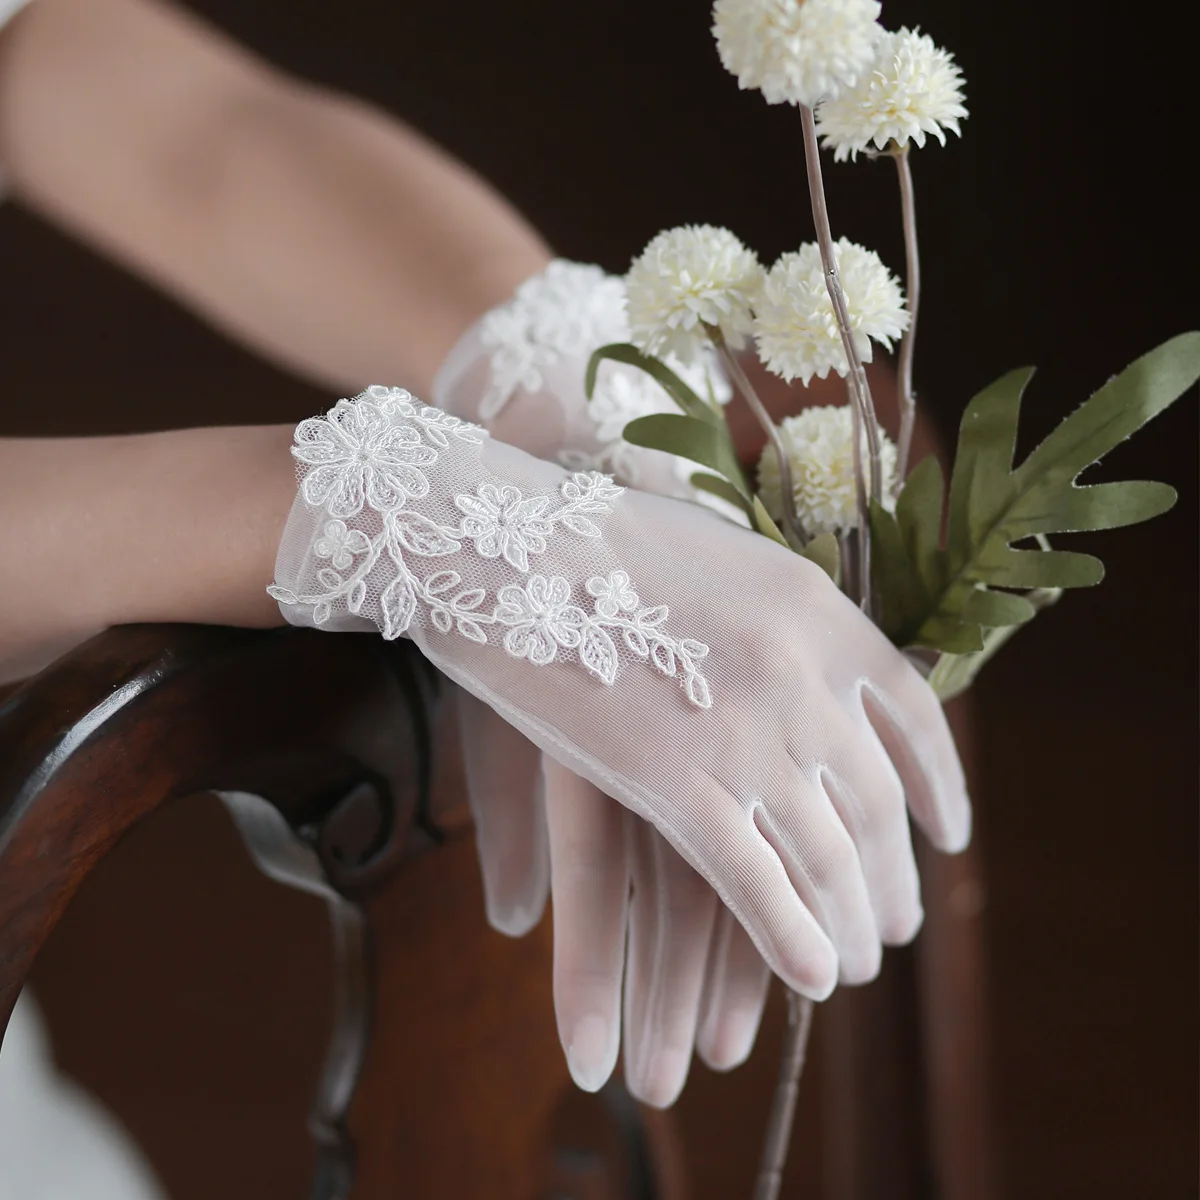 

Wedding Gloves For Bride Lace Tulle Short Paragraph Mittens Wedding Dresses Party Accessories Charming Lady Women Glove Fingers